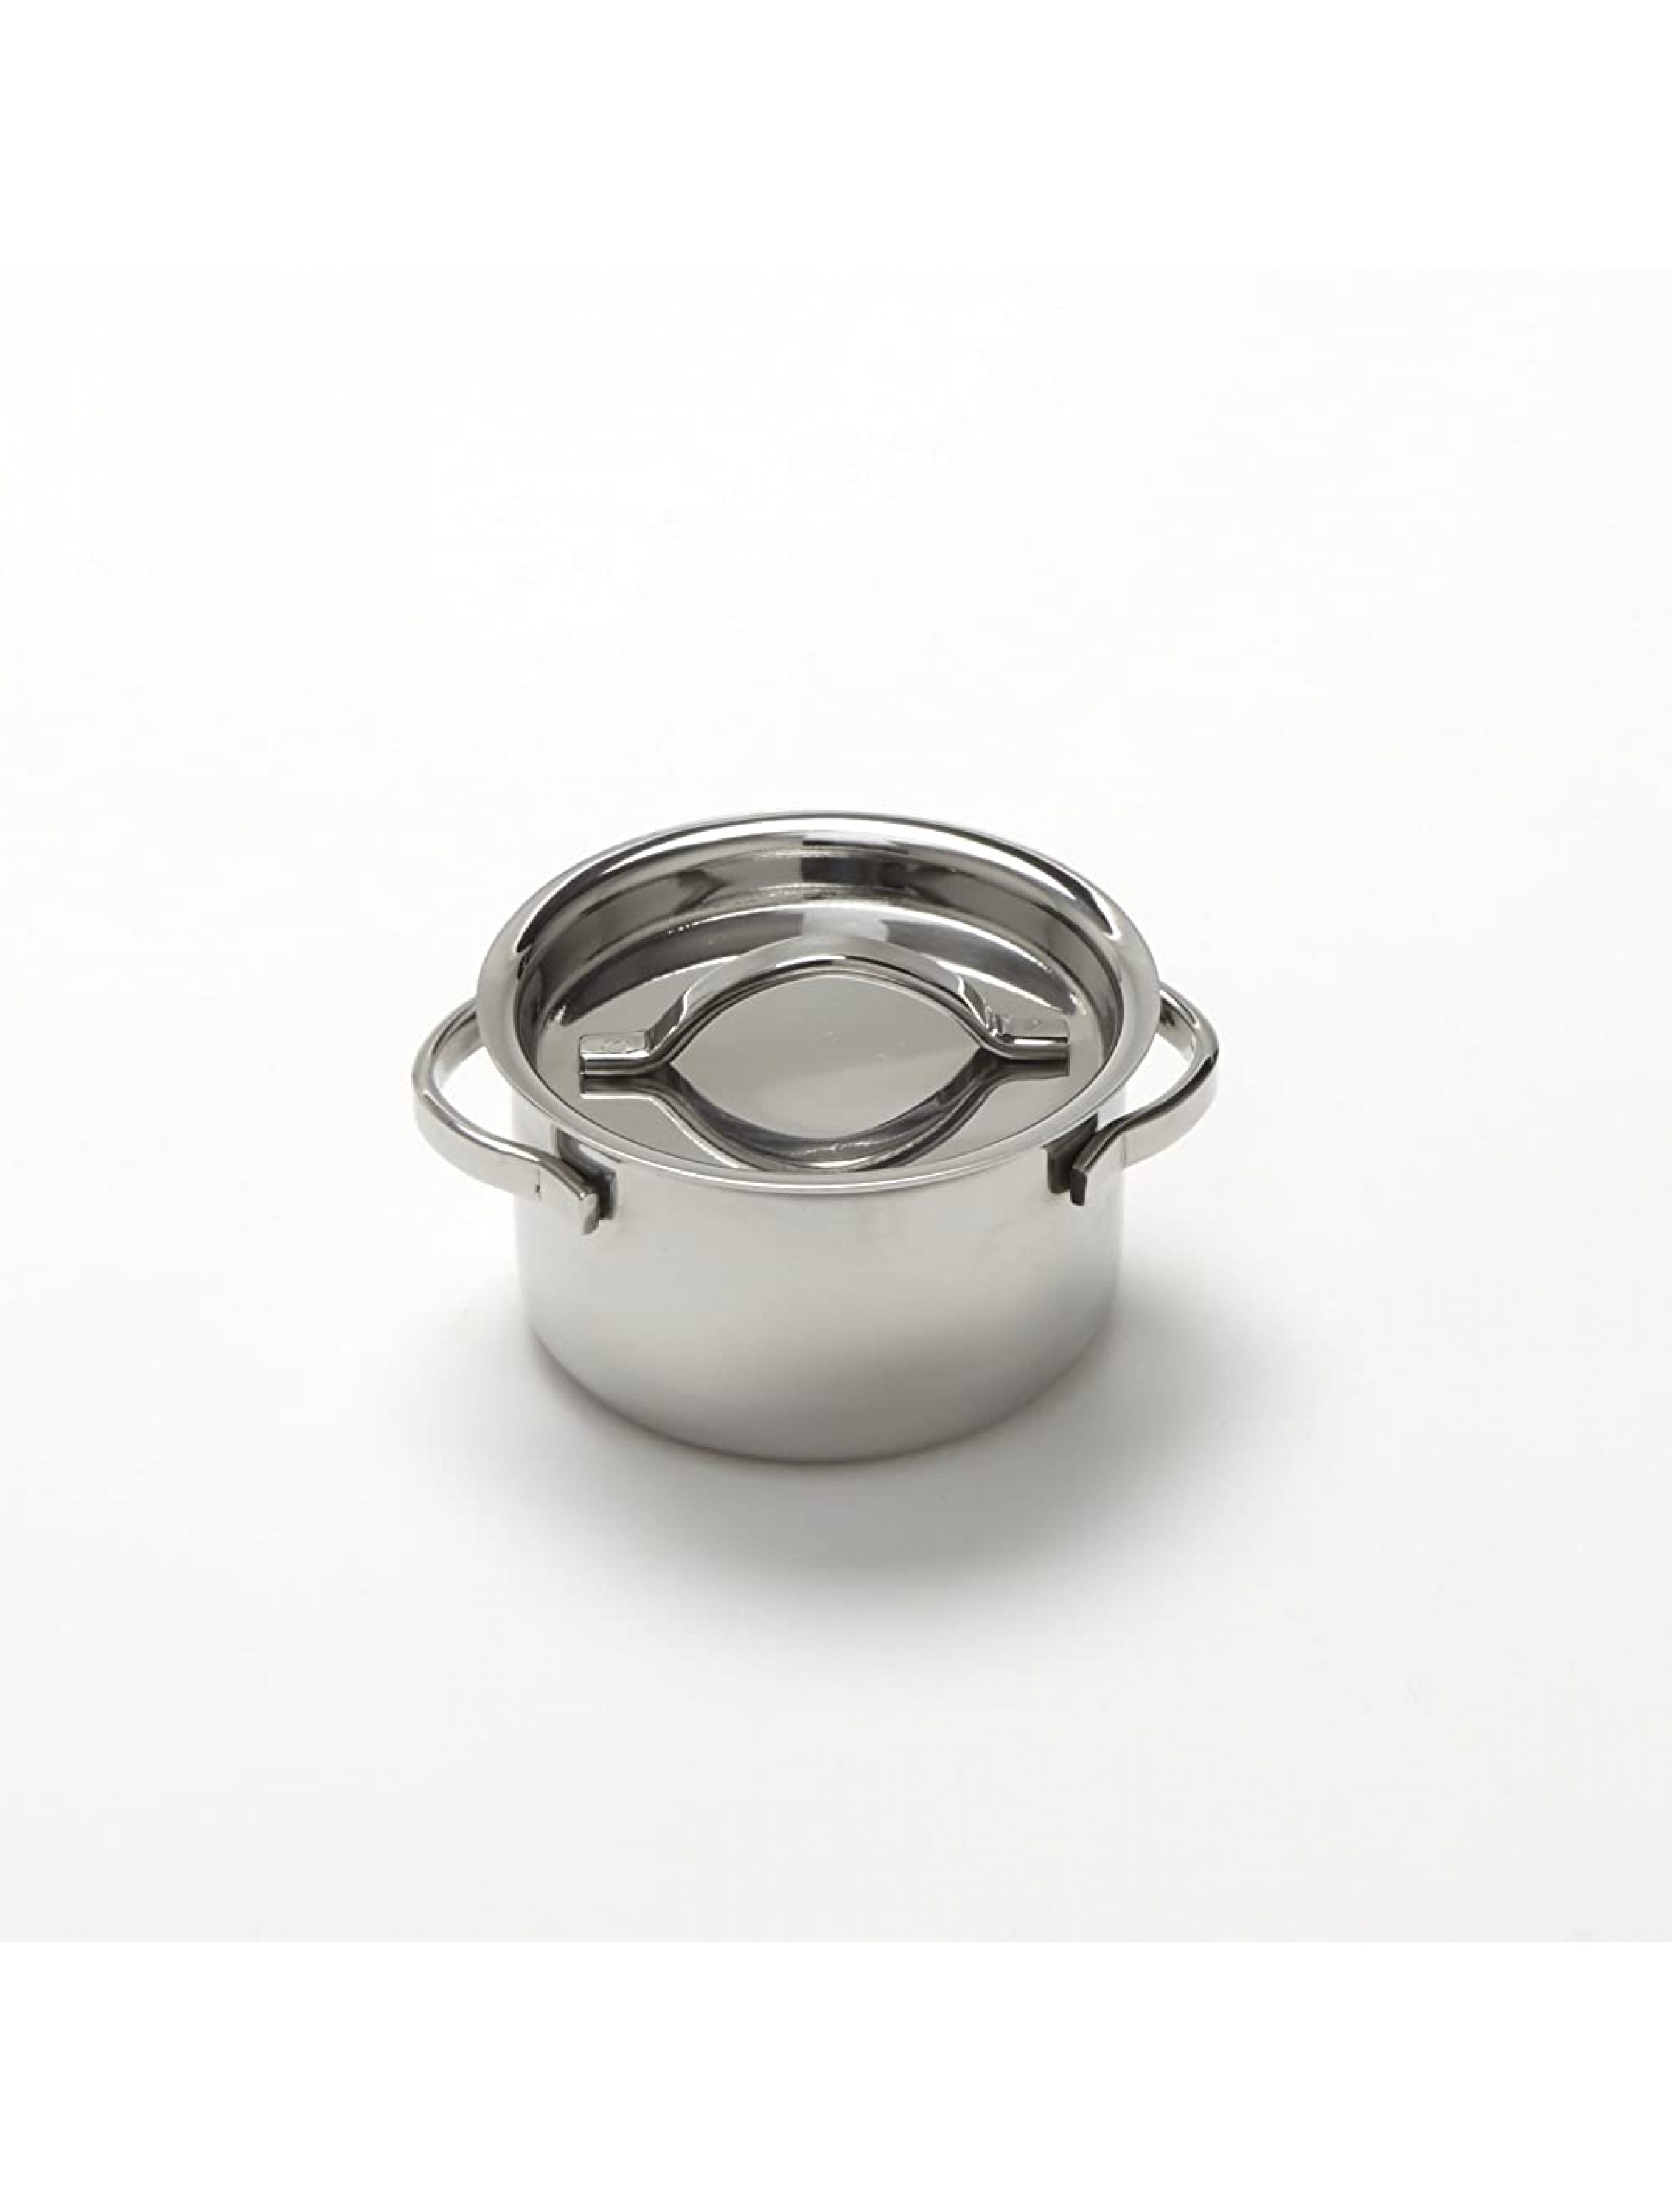 American Metalcraft MPL4 Stainless Steel Mini Pot with Lid 4 oz. - BUGMTB9CD